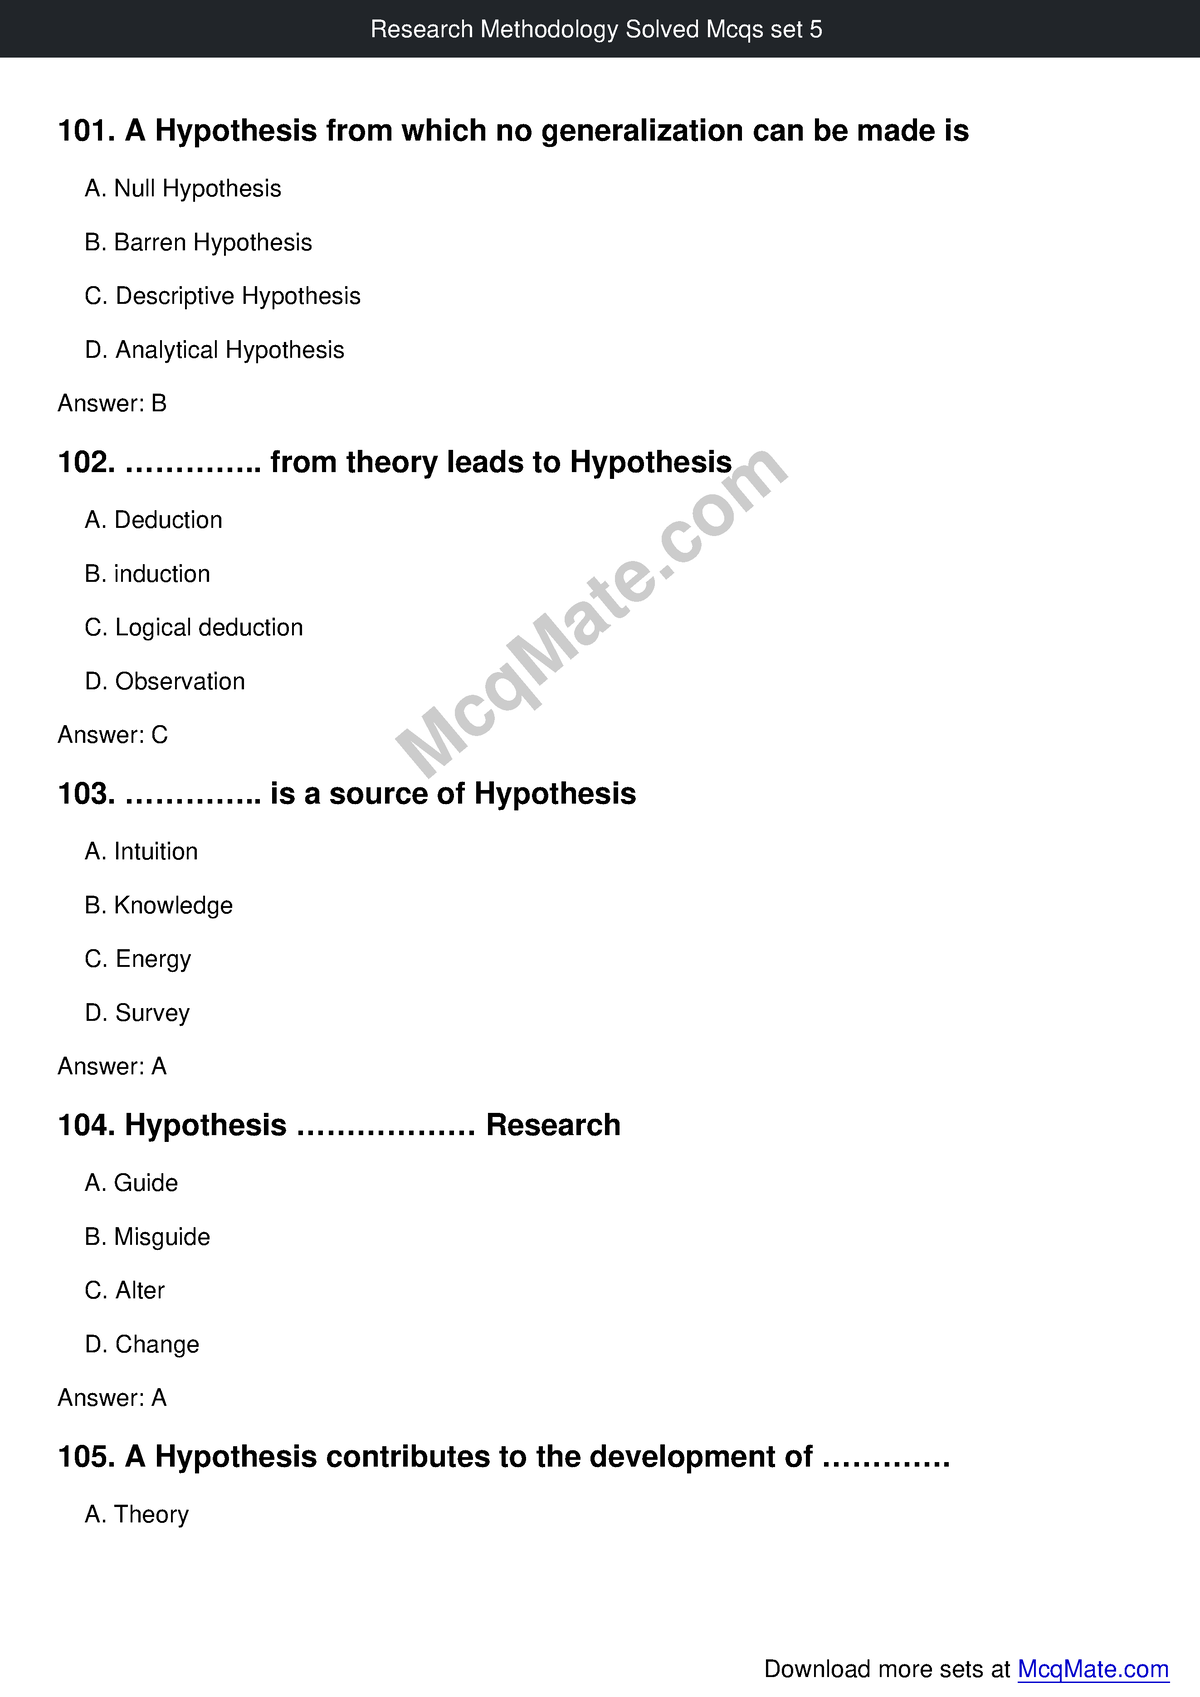 hypothesis in research mcqs